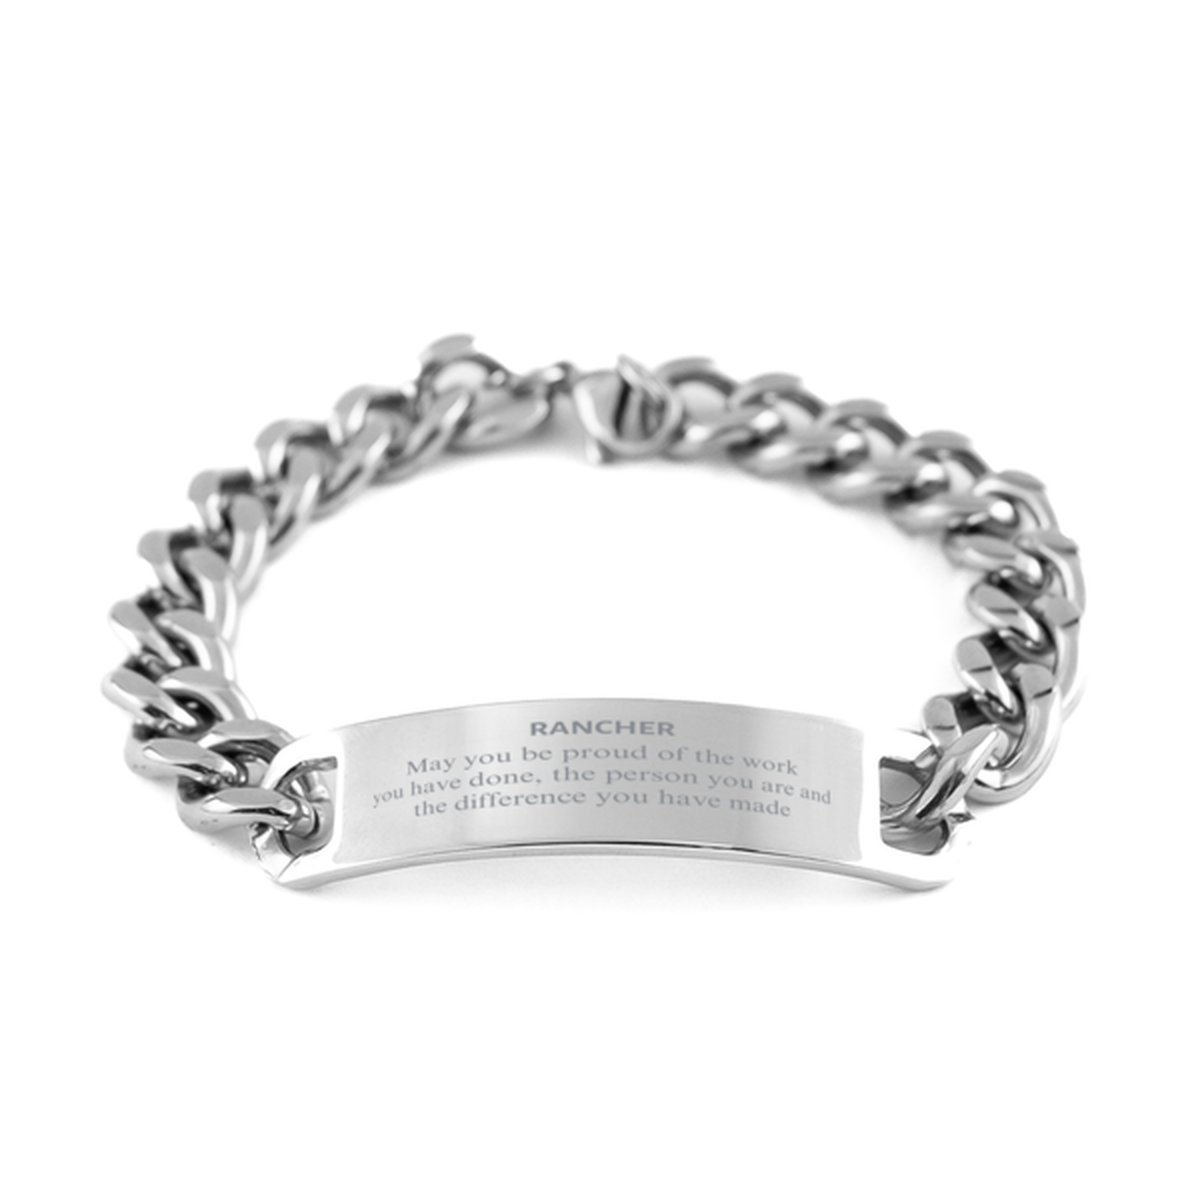 Rancher May you be proud of the work you have done, Retirement Rancher Cuban Chain Stainless Steel Bracelet for Colleague Appreciation Gifts Amazing for Rancher